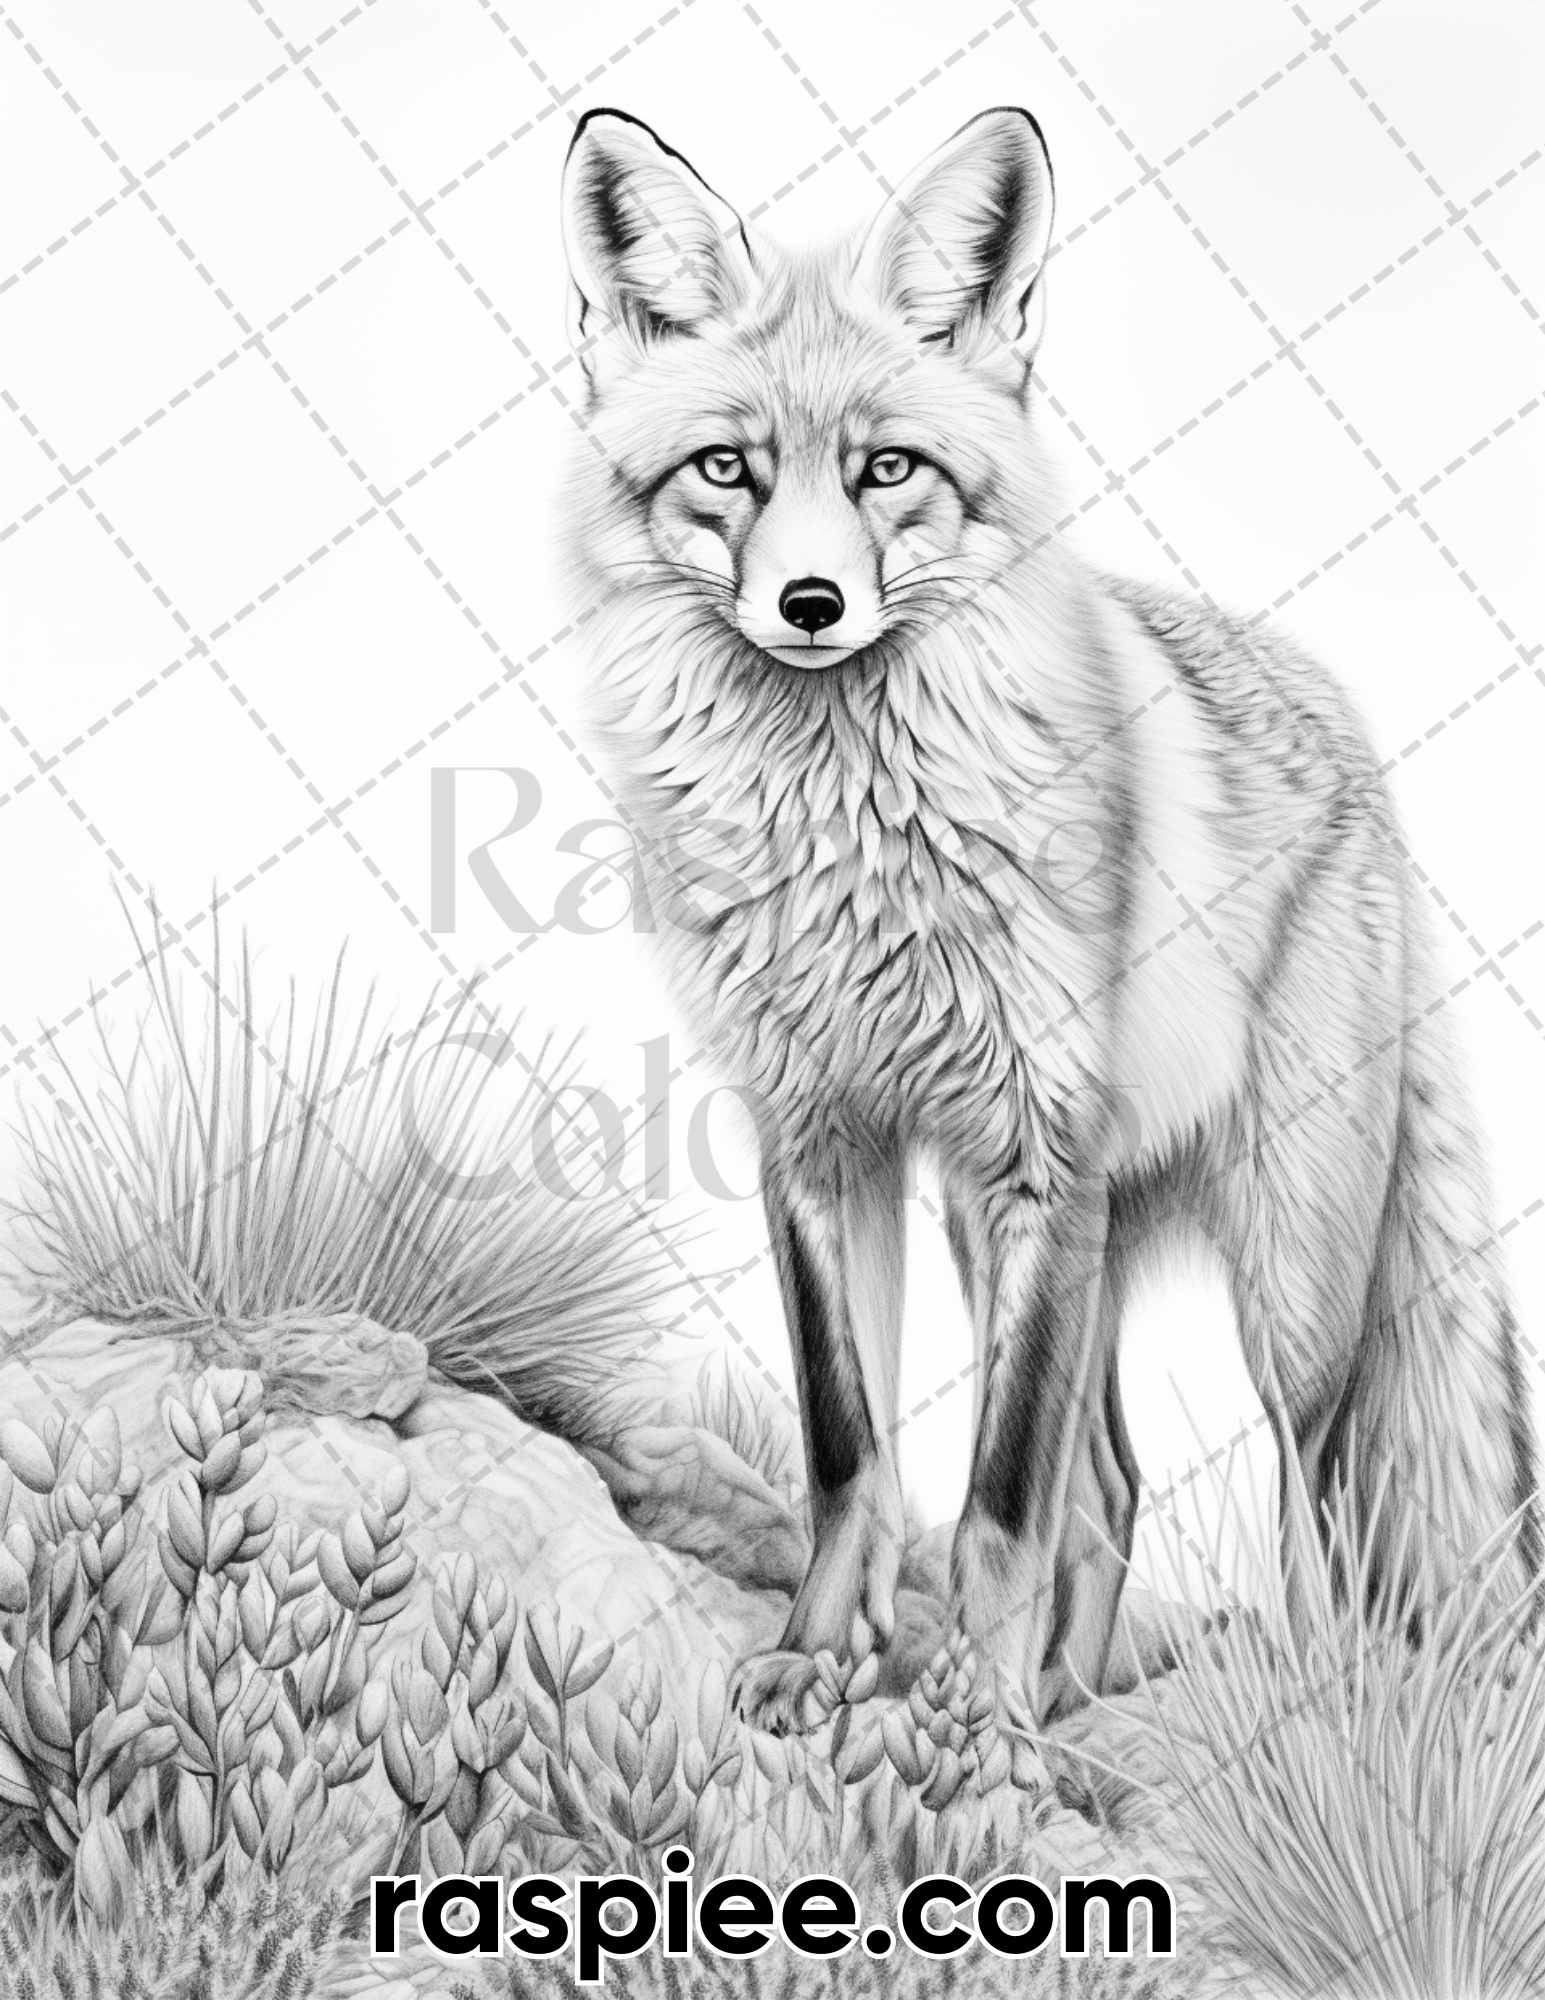 Wild Animals Coloring Pages, Adult Coloring Prints, Relaxing Wildlife Coloring, Stress Relief Coloring Book, Detailed Adult Coloring, Creative Relaxation Activity, Printable Coloring Sheets, Grayscale Coloring Pages, Animals Coloring Book Printable 